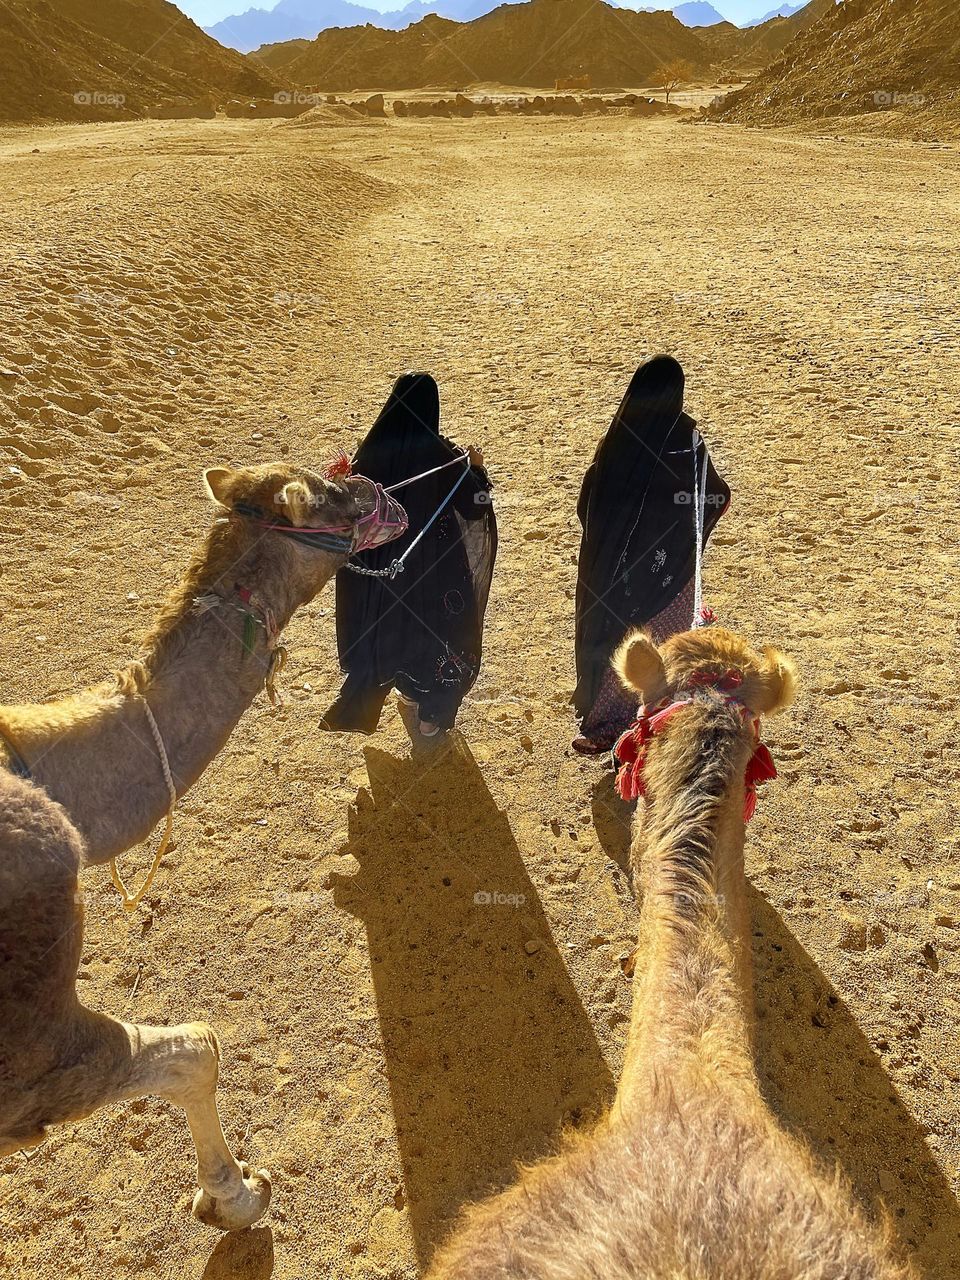 Top view from the camel’s ride on the desert 